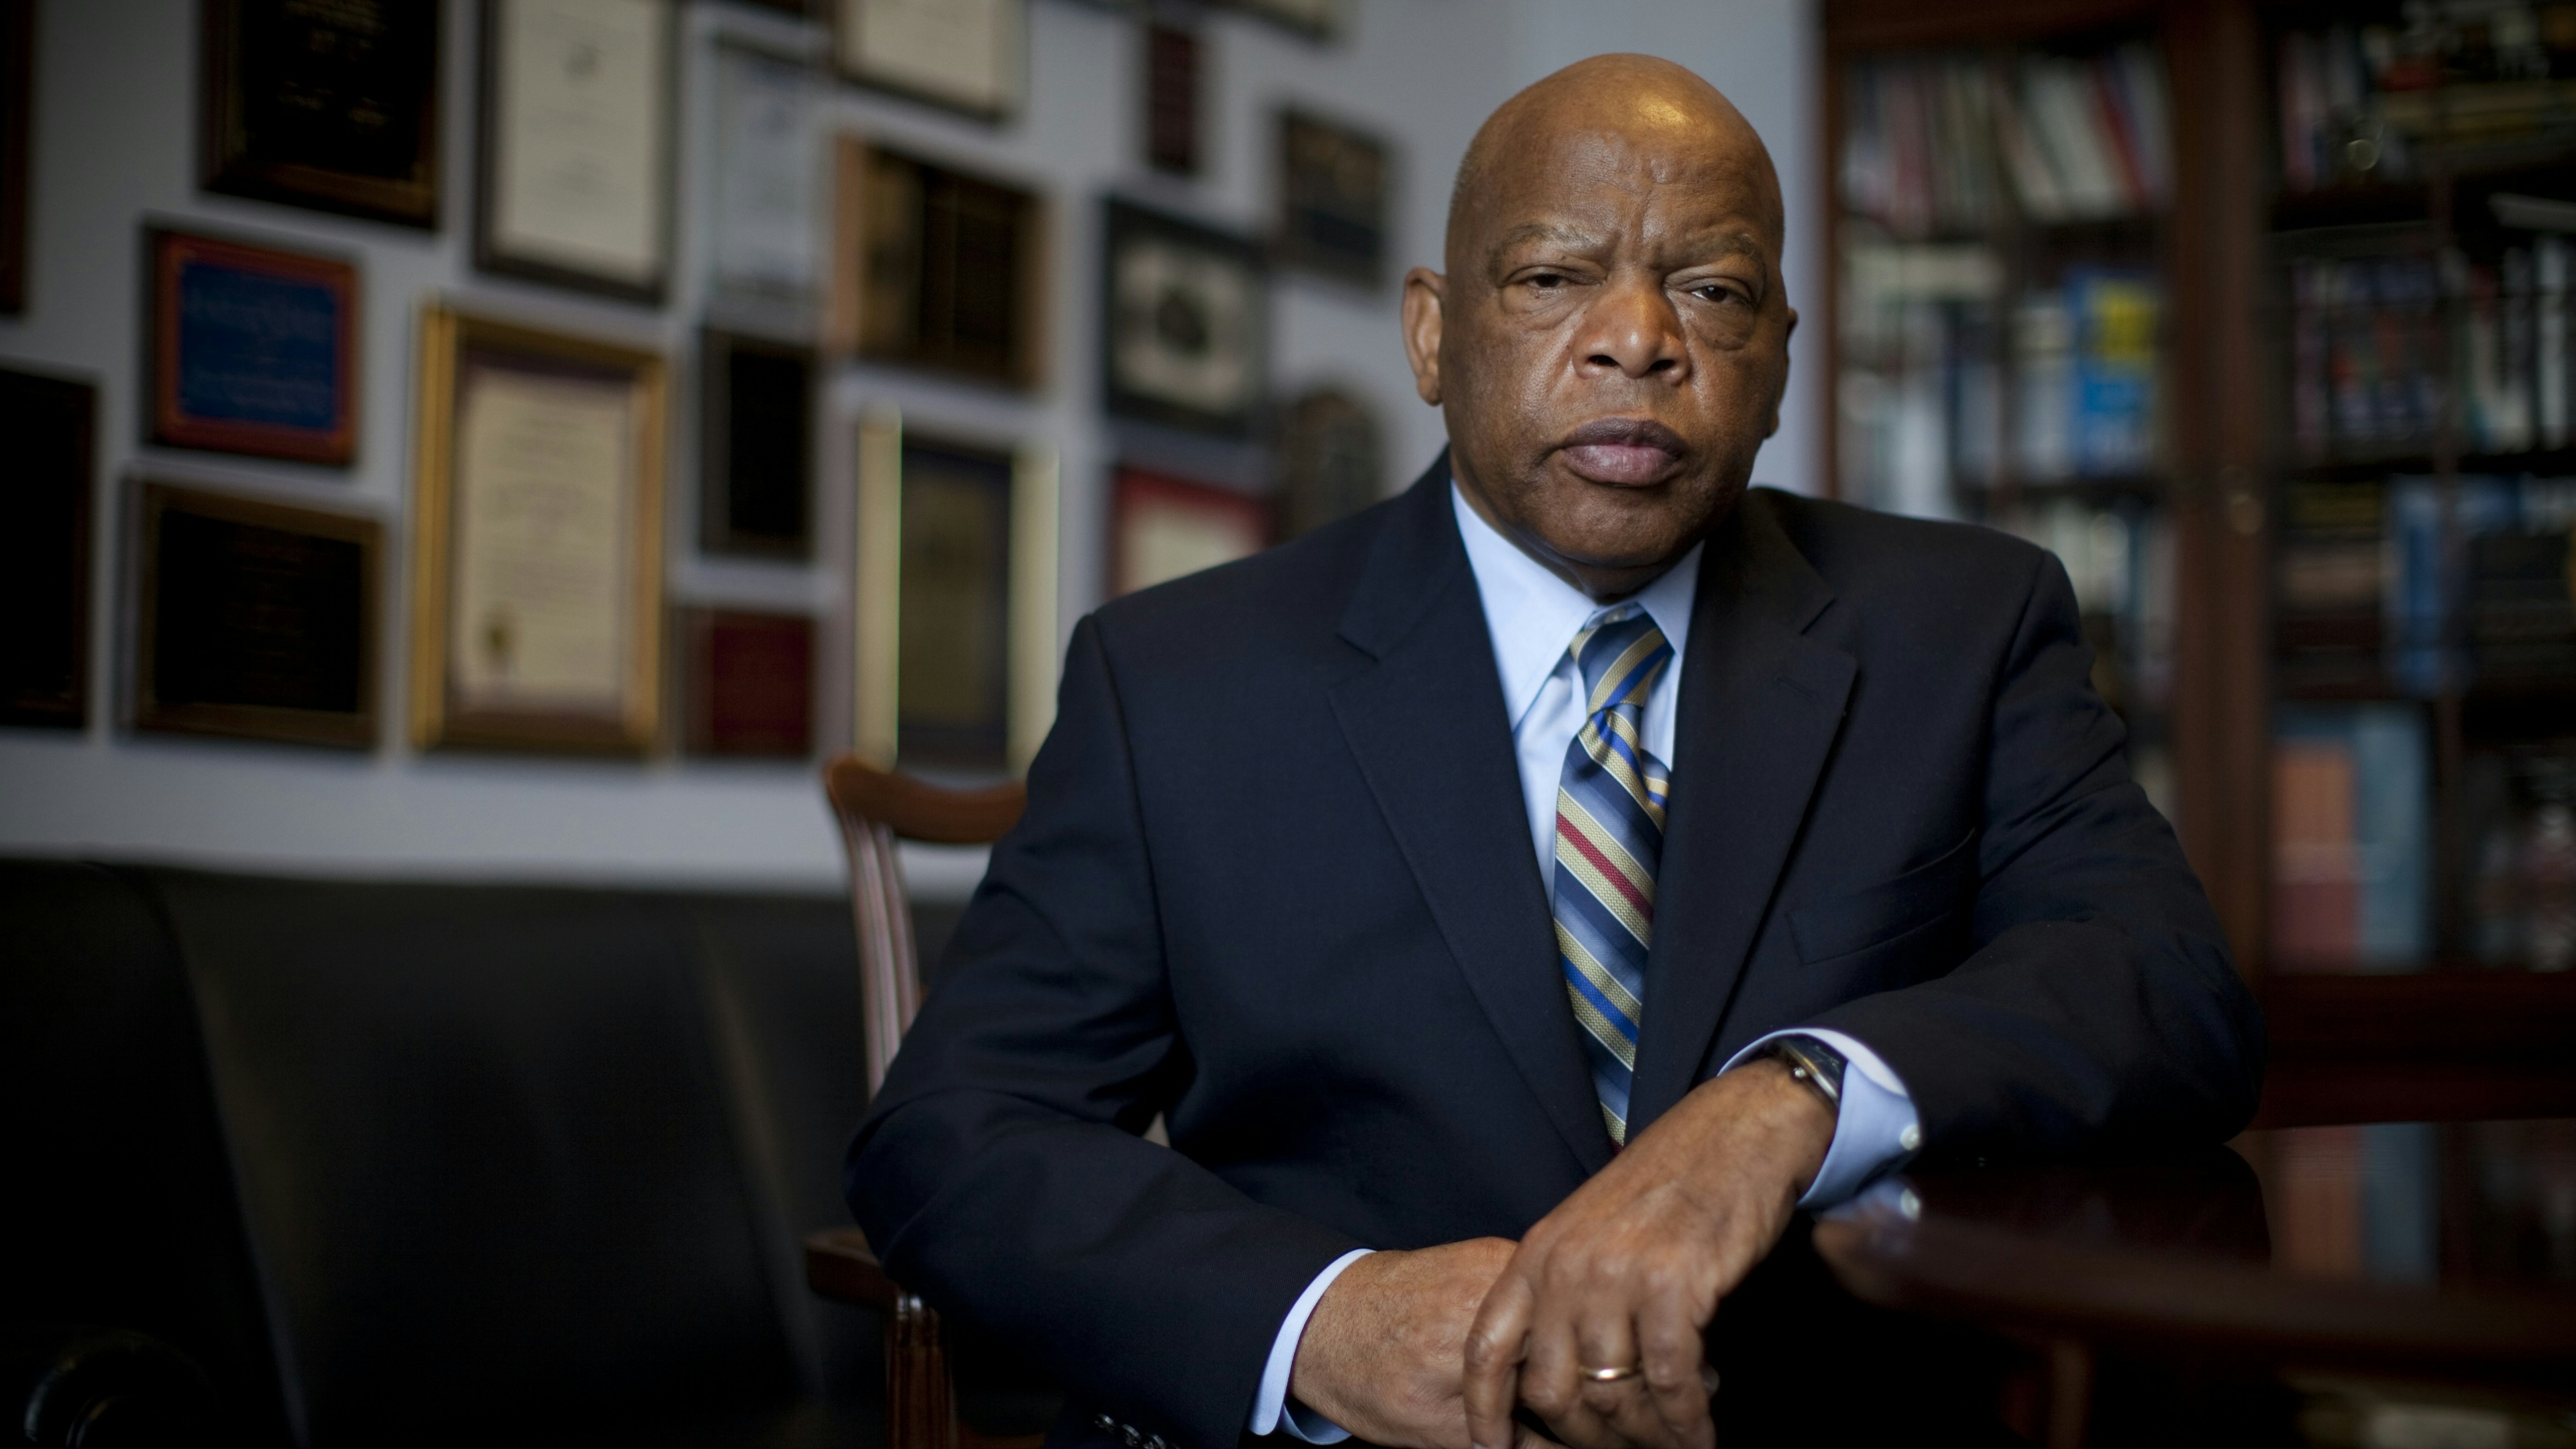 Congressman John Lewis (D-GA) is photographed in his office